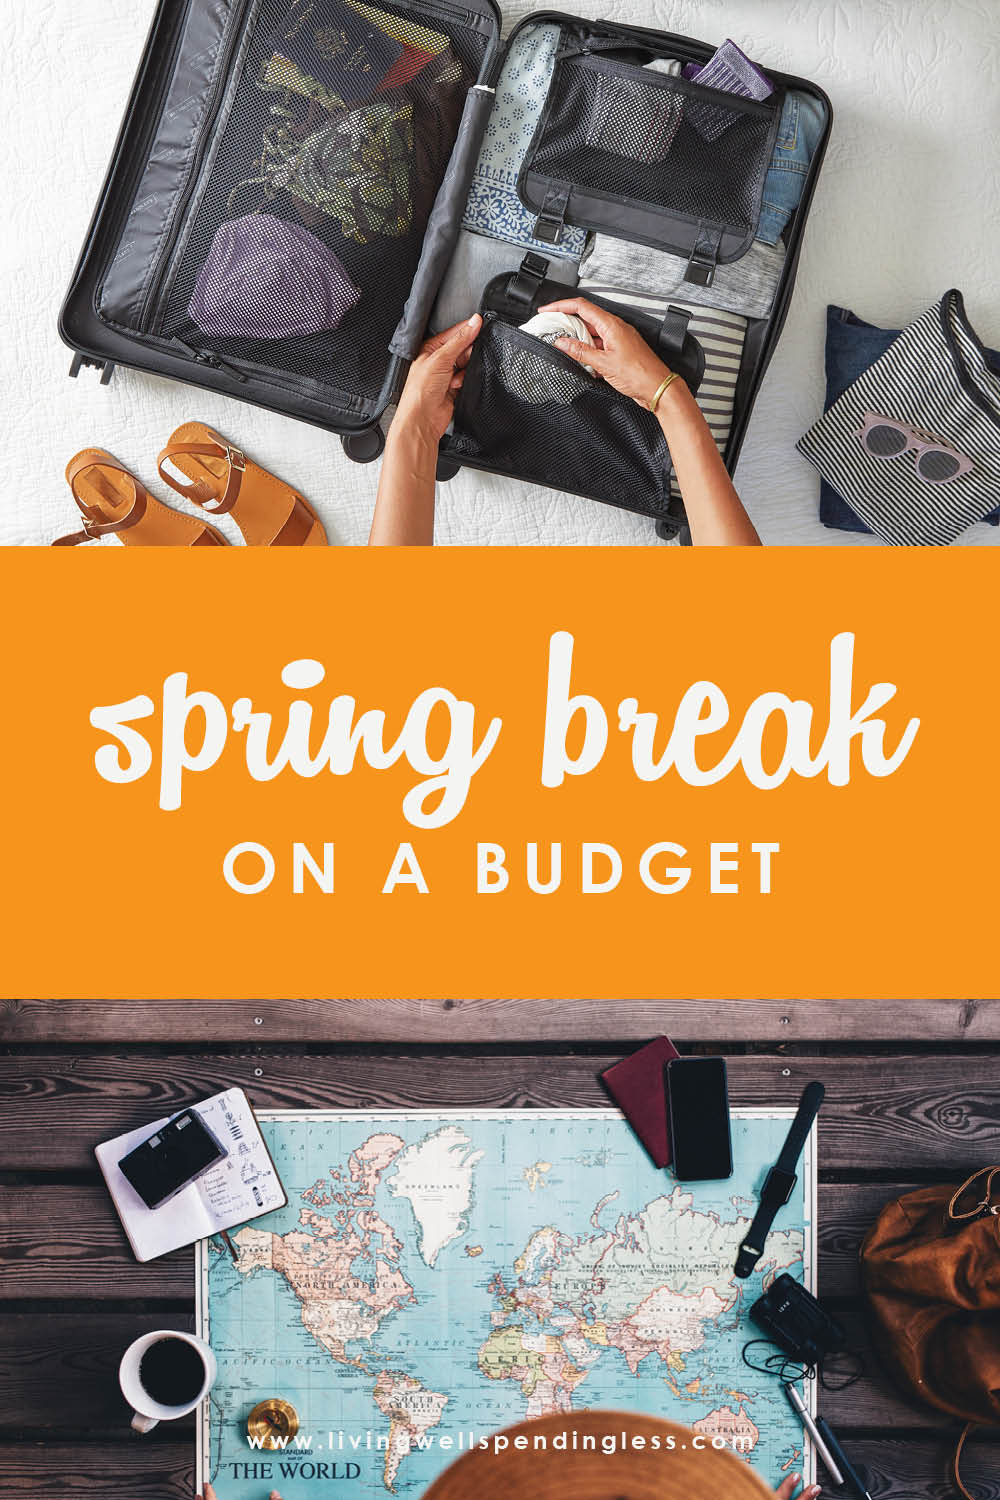 Want to plan an awesome spring break but not sure if your budget can handle it? Don't miss these smart tips for planning an awesome spring break getaway or staycation that won't break the bank or have you going into debt. Awesome ideas that get the whole family involved! #vacation #vacationtips #springbreak #budgeting #budgettips #budget #staycation